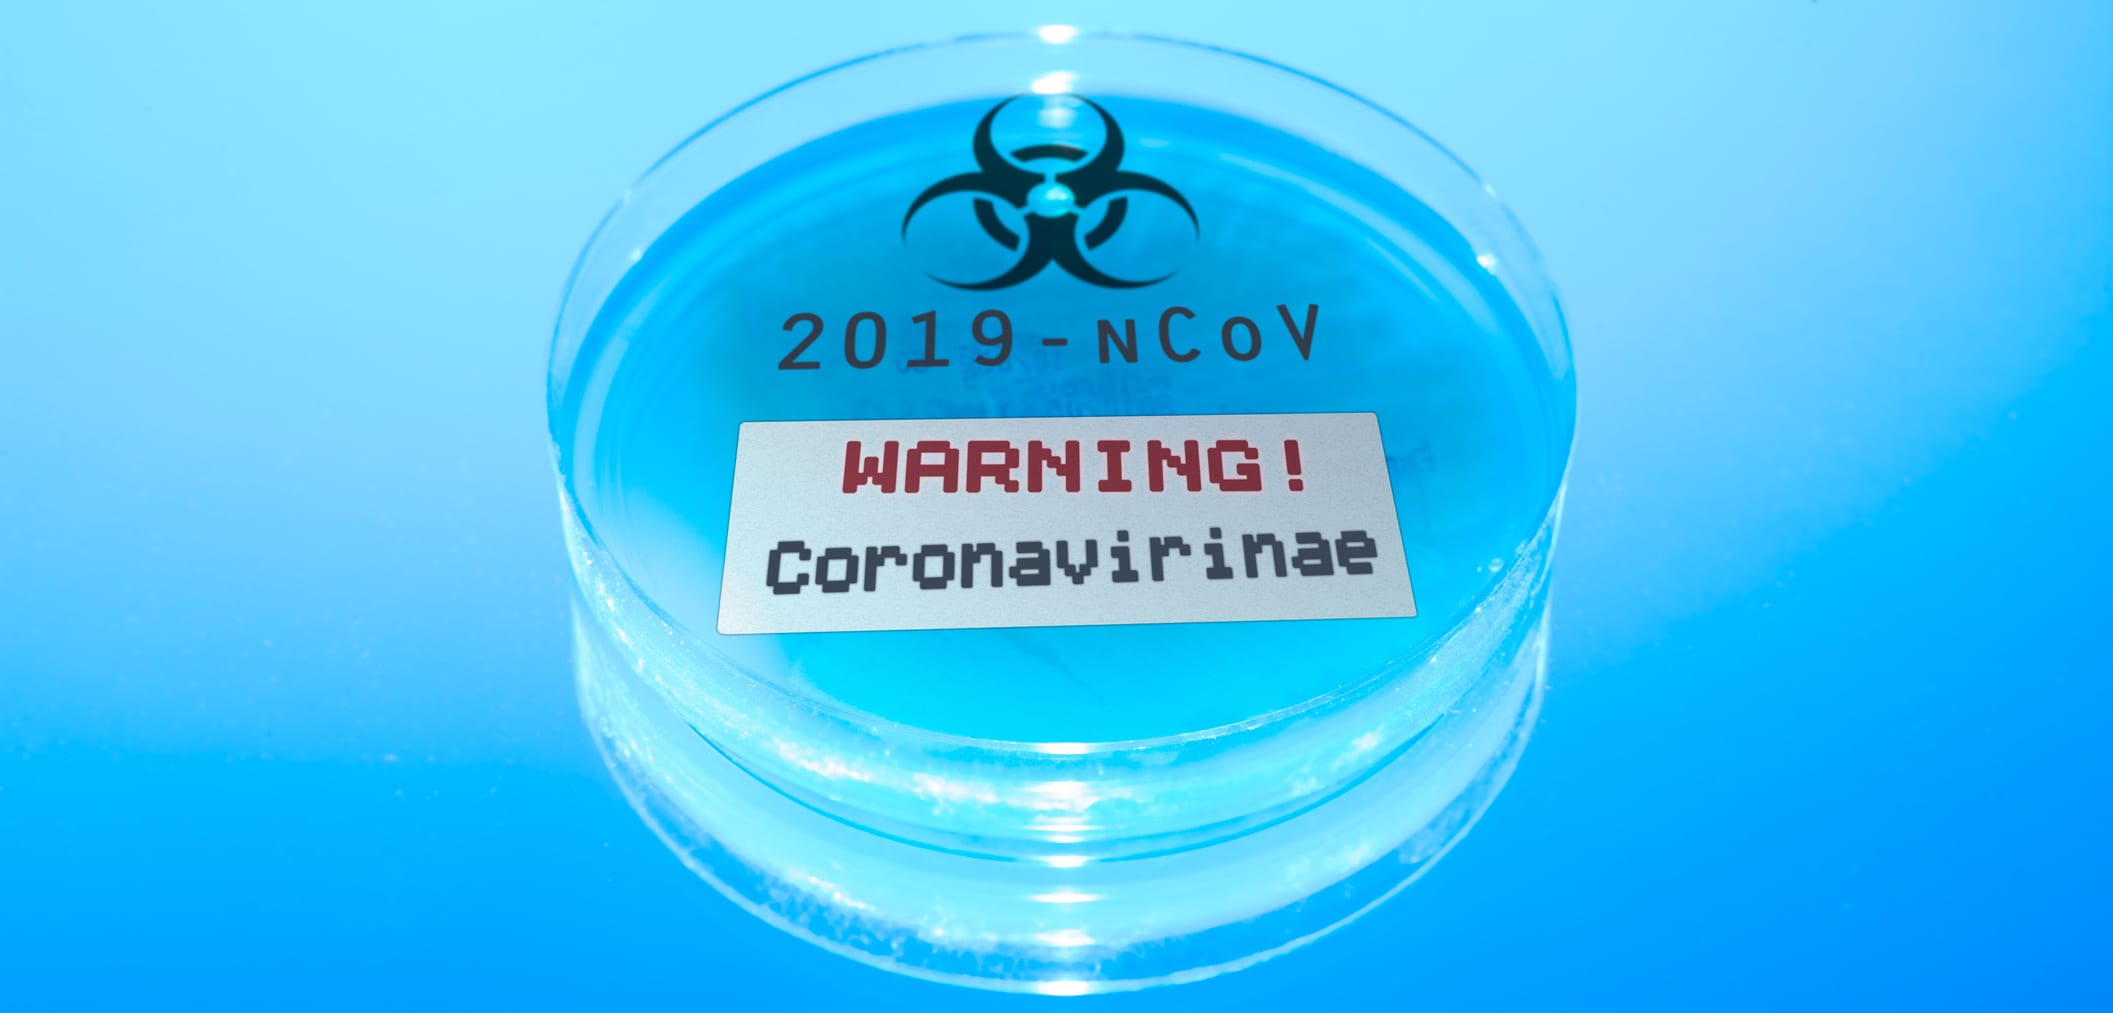 Offer Hands-free Care During the Coronavirus Outbreak